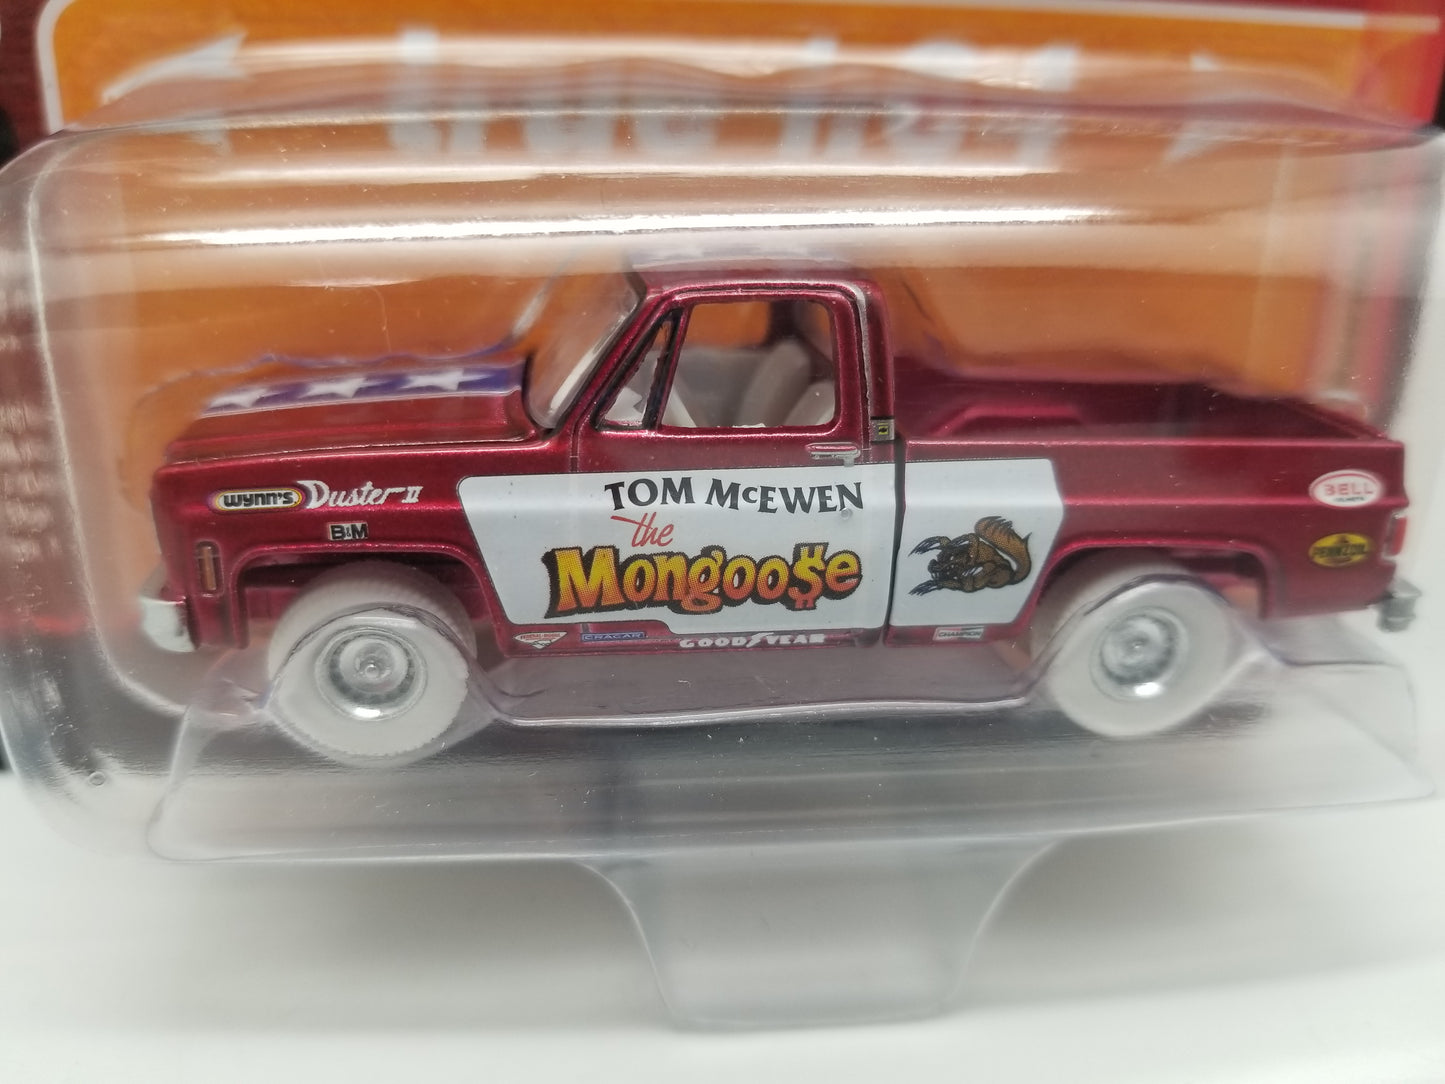 AW CHASE 1973 Chevy C10 - Tom 'Mongoose' McEwen